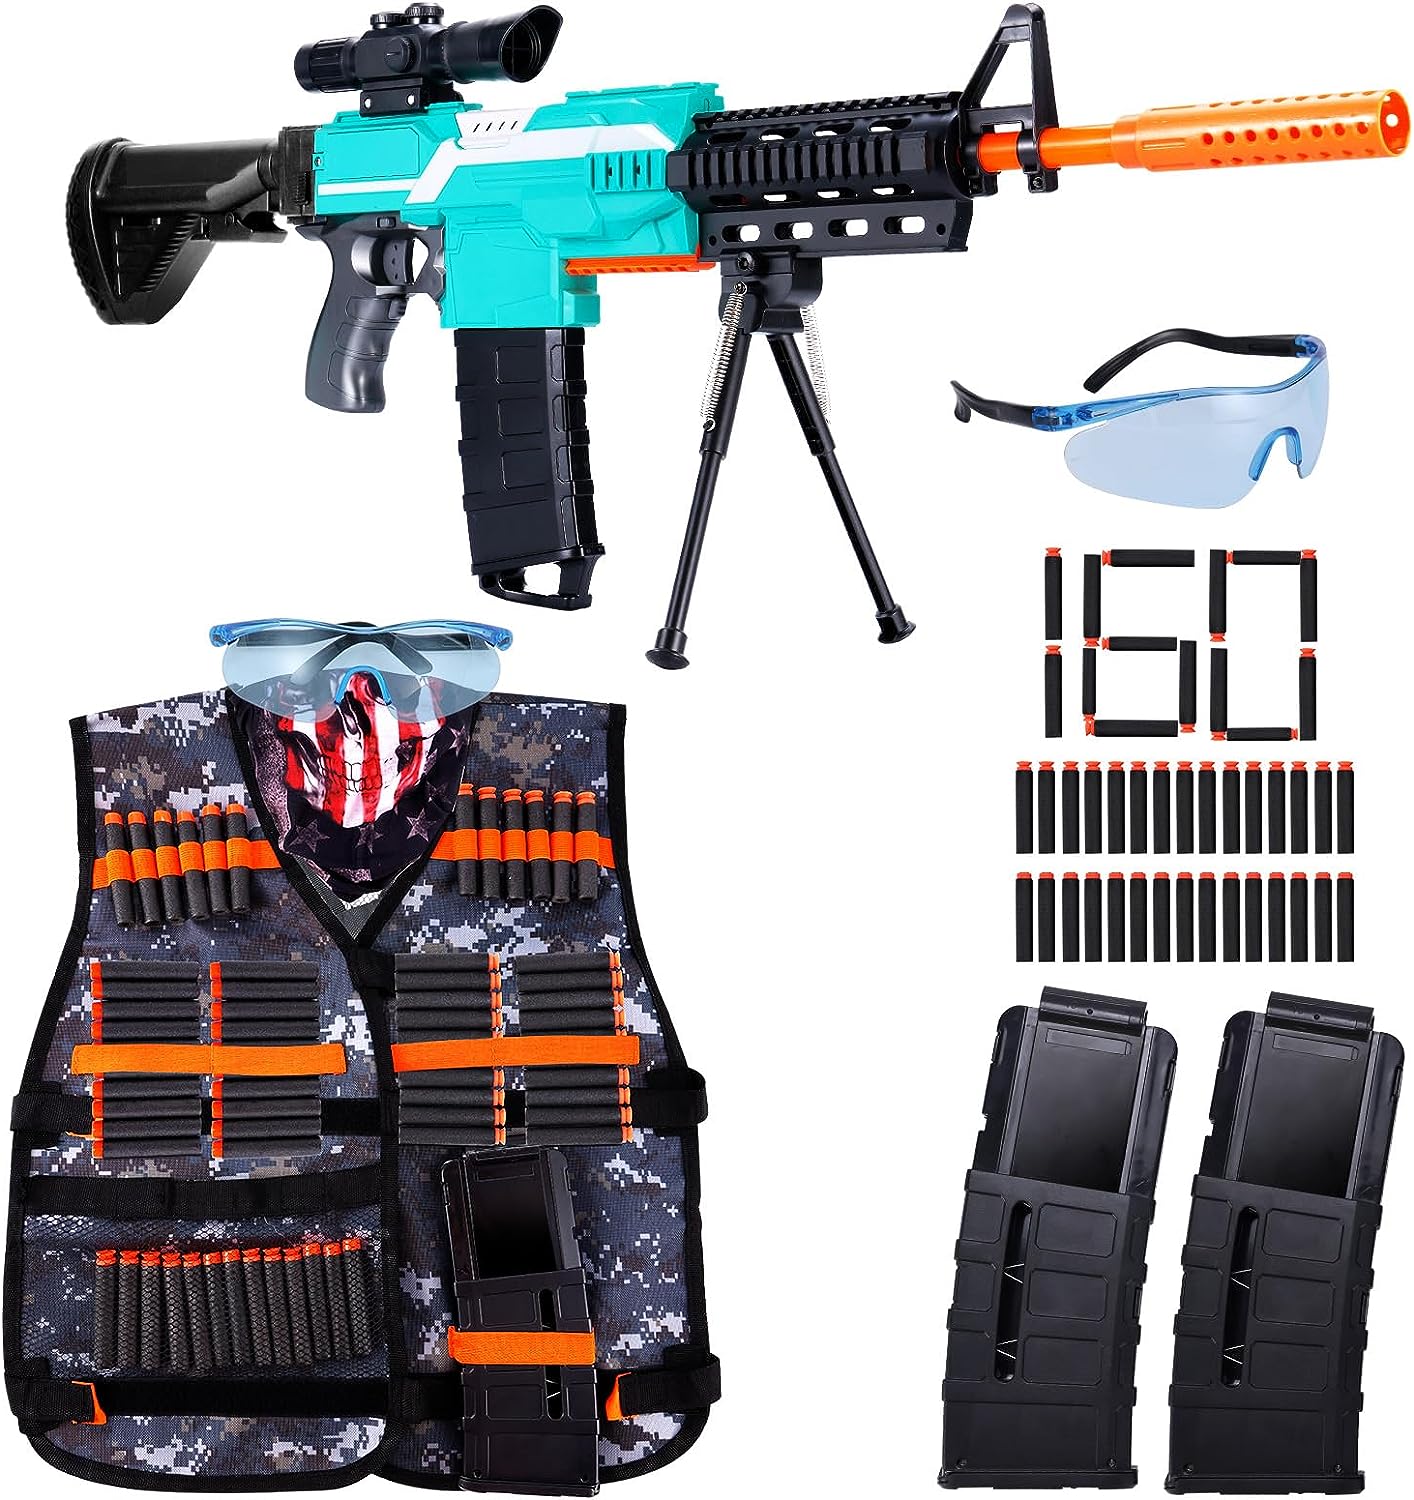  Xmifer Toy Guns Electric Machine Gun for Nerf Guns Automatic,  Nerf Guns Sniper with Scope, 2 Magazines Tactical Vest Kit with 100 Darts,  Nerf Guns for Kids Ages 8-12 Toy Gifts